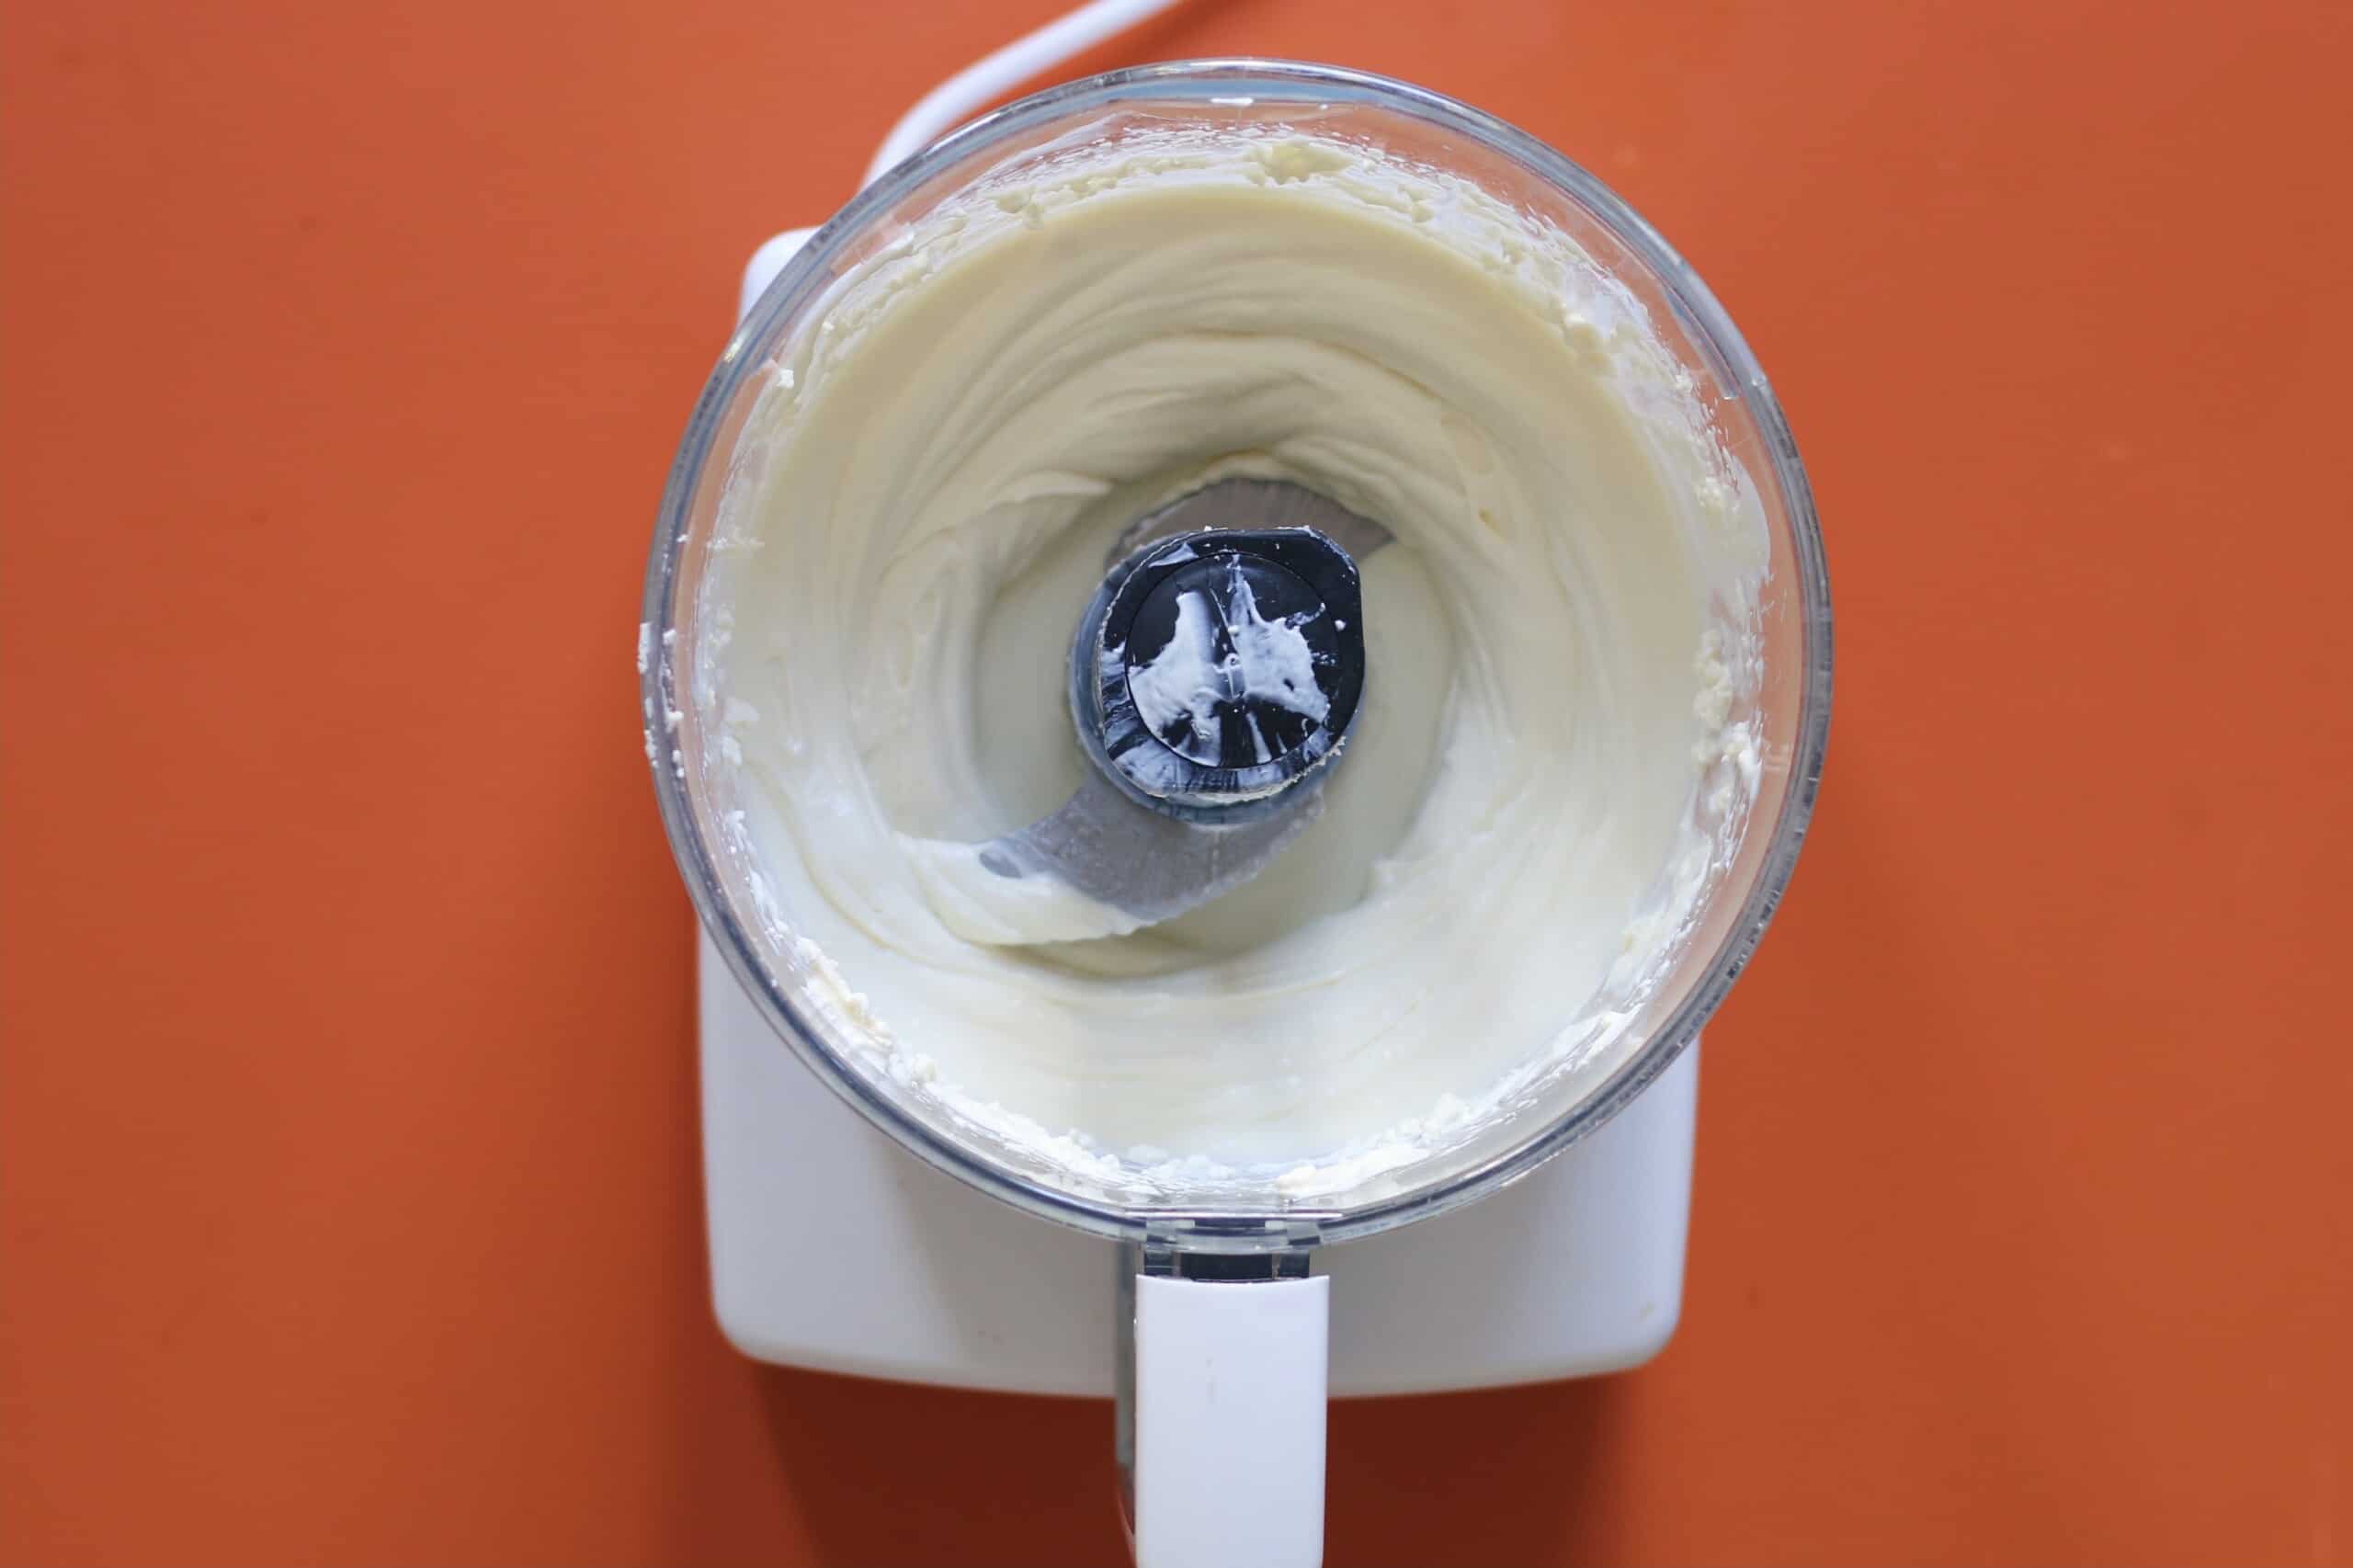 Whipped feta blended together in a food processor on an orange background.